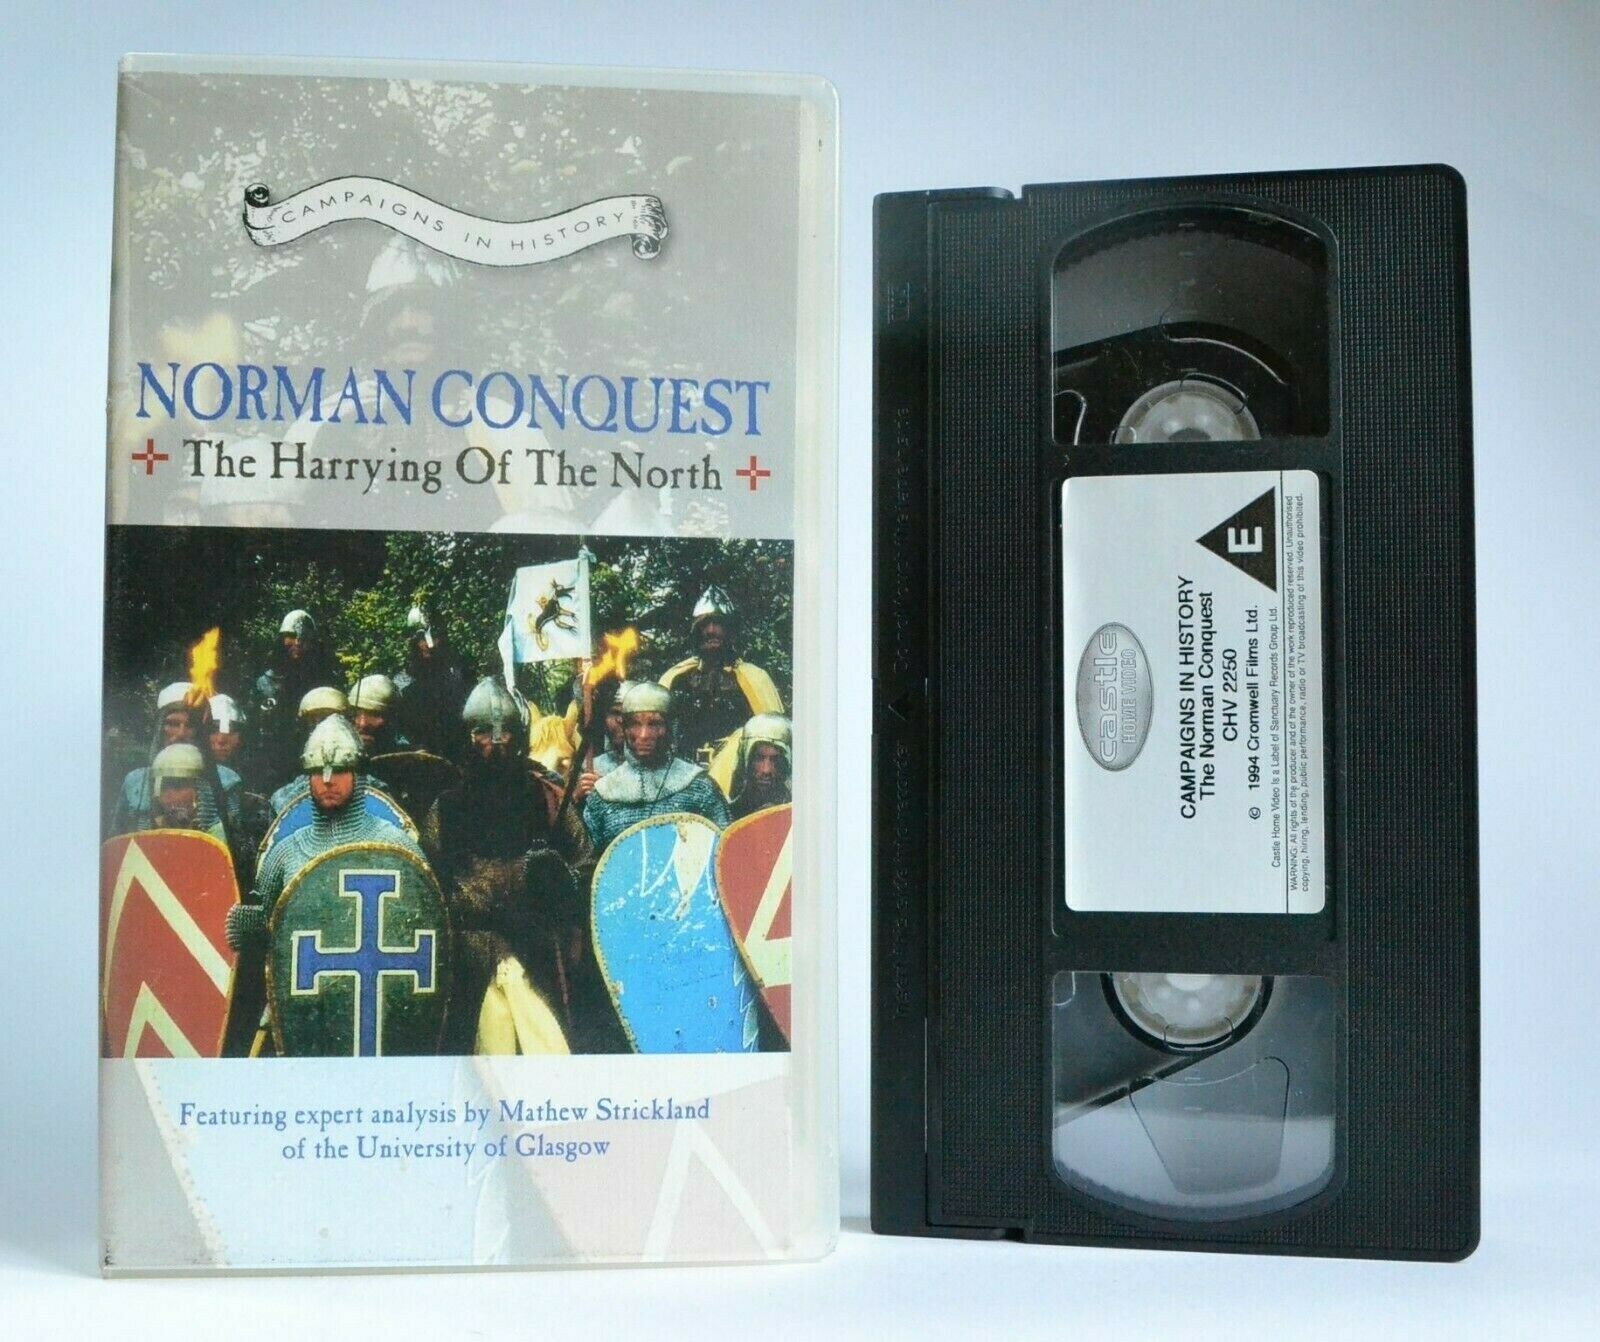 Norman Conquest: The Harrying Of The North - Documentary - England History - VHS-